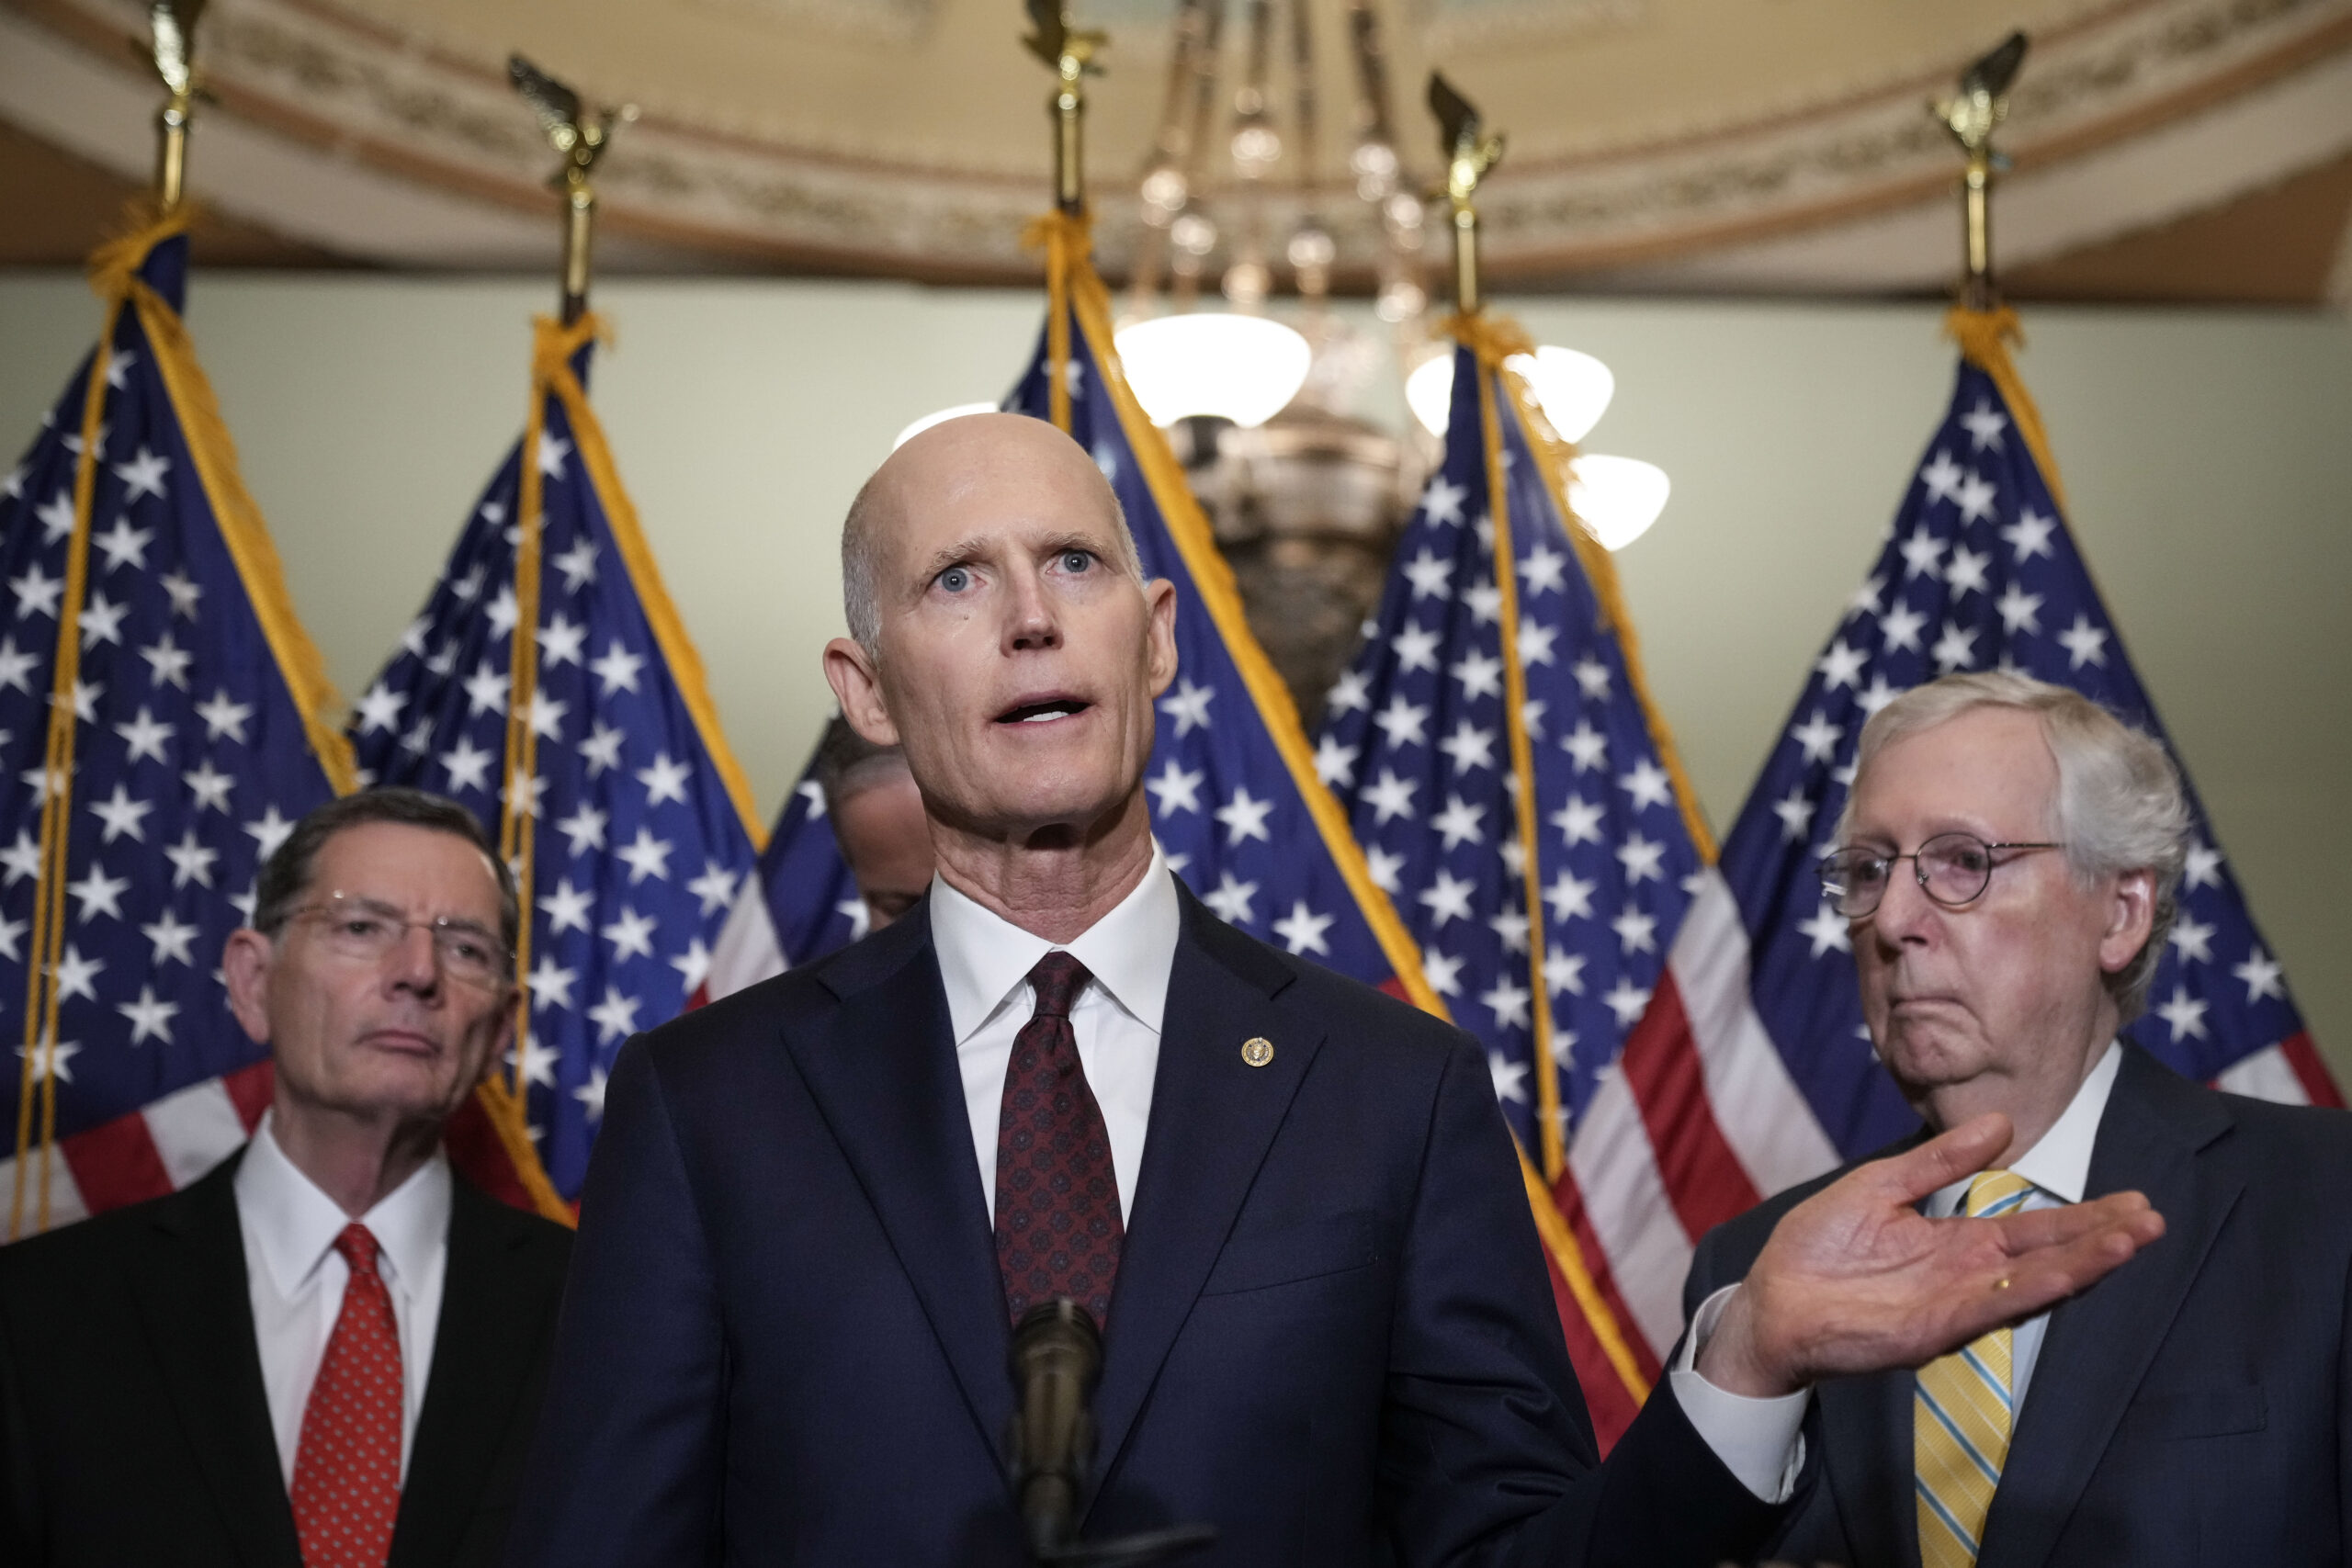 Rick Scott Goes After Mitch McConnell for Throwing Shade at GOP Senate Hopefuls: ‘If You Trash Talk Our Candidates … You Hurt Our Chances’ (mediaite.com)